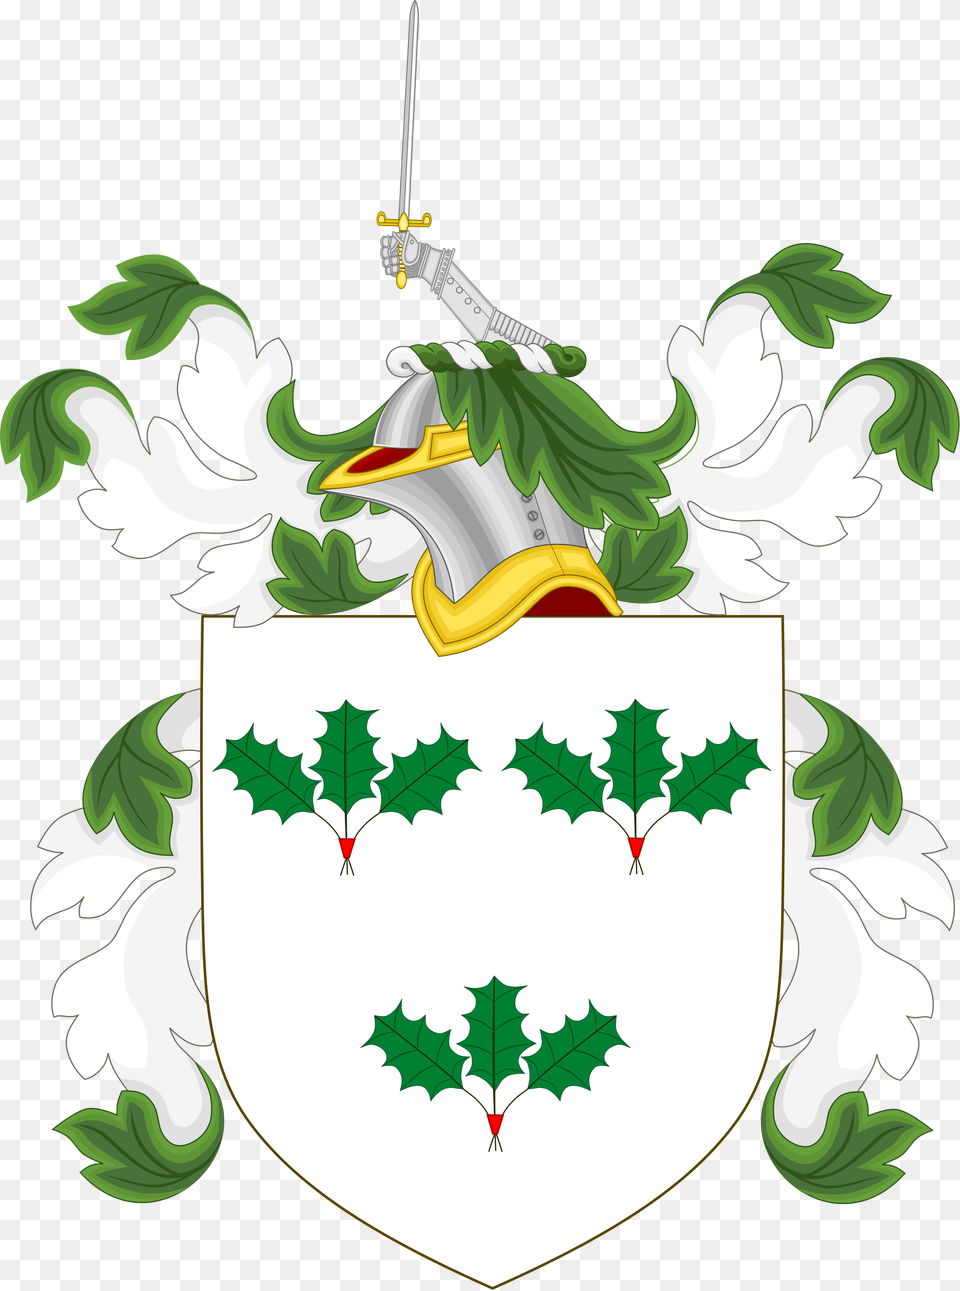 Open Myles Standish Coat Of Arms, Armor, Leaf, Plant, Shield Png Image